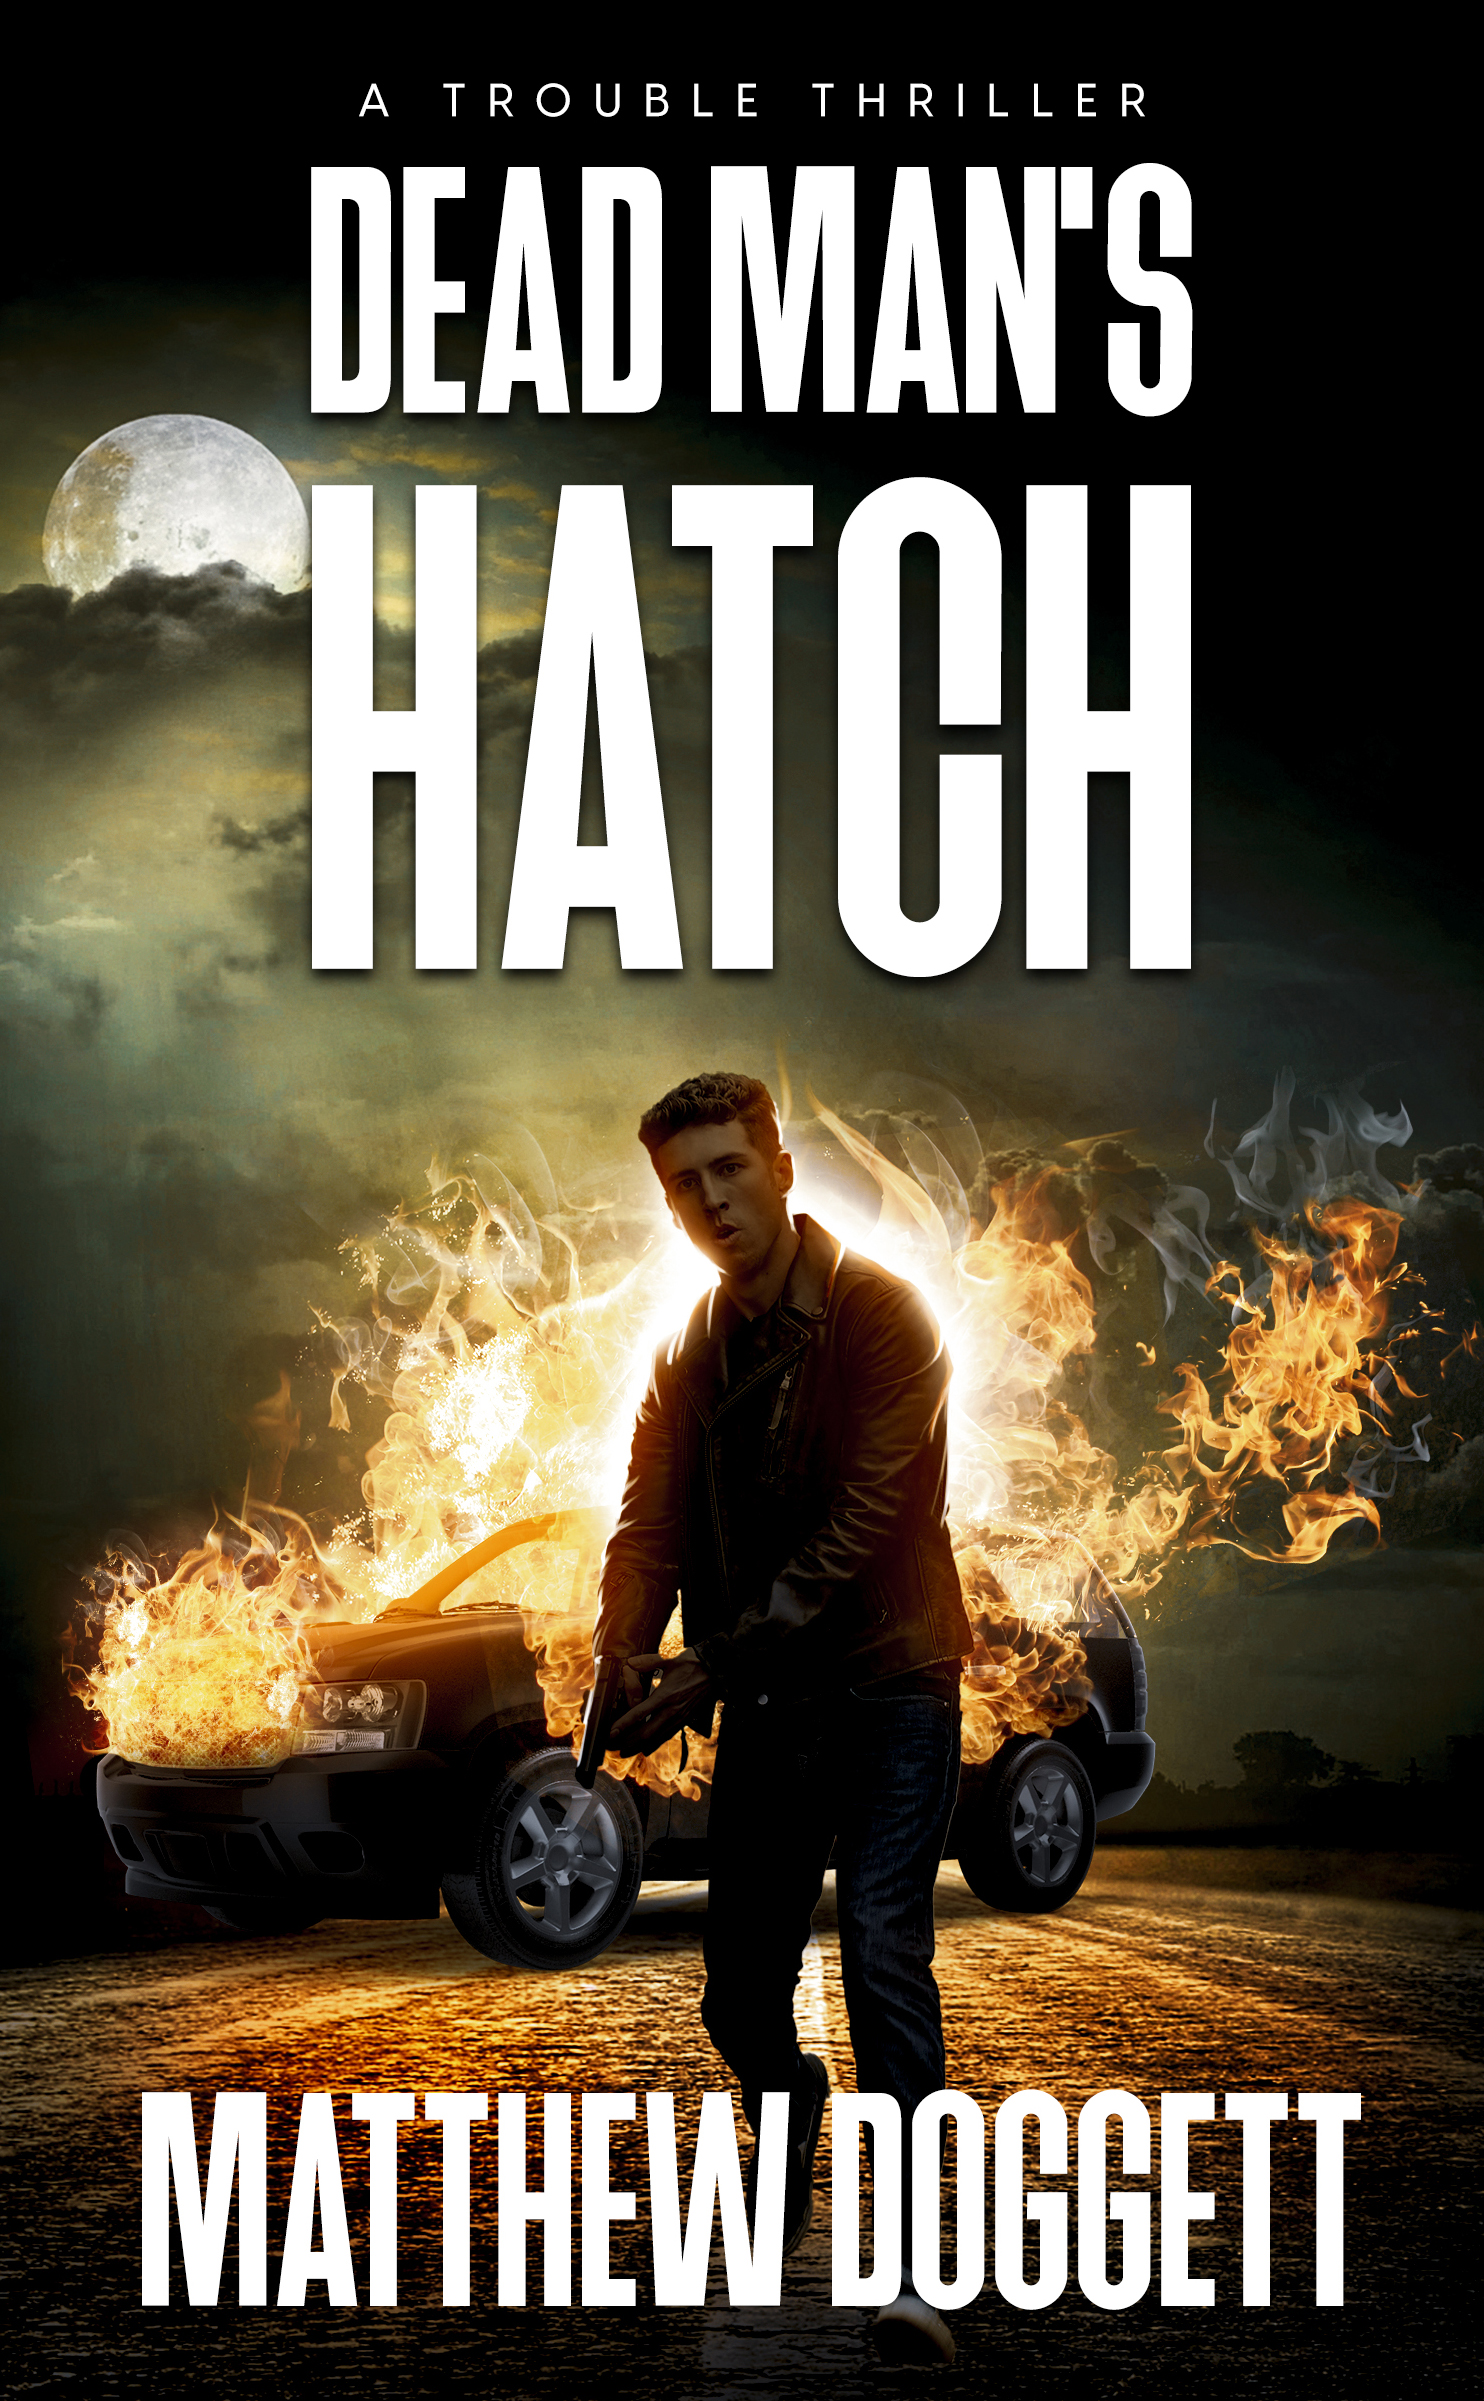 Dead Man's Hatch book cover.